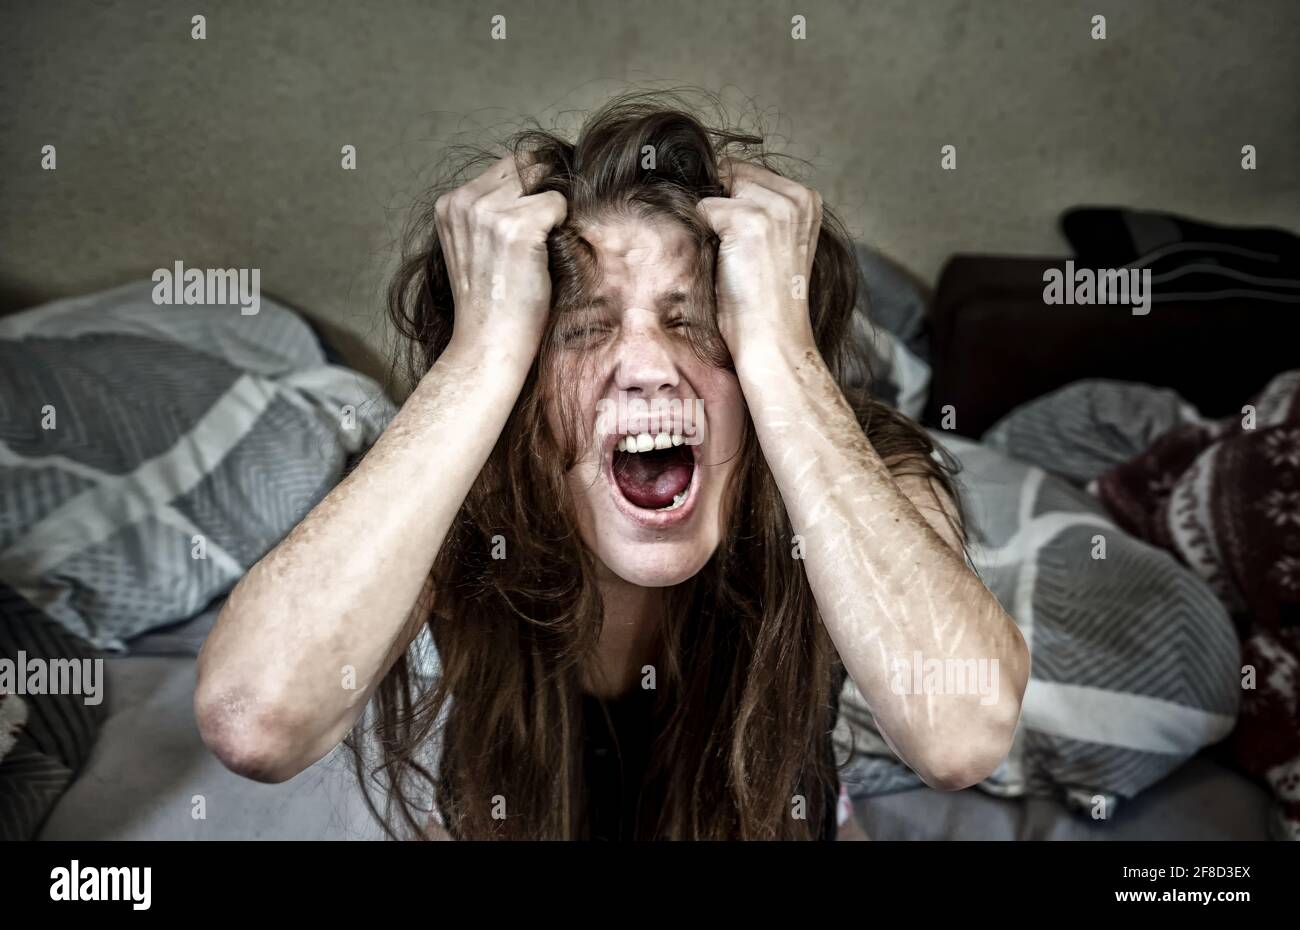 Portrait, hands and arms of a Woman screaming in hysteria and desperation, with heavy cuts and scars of self-mutilation in frustration, self-abusing, Stock Photo